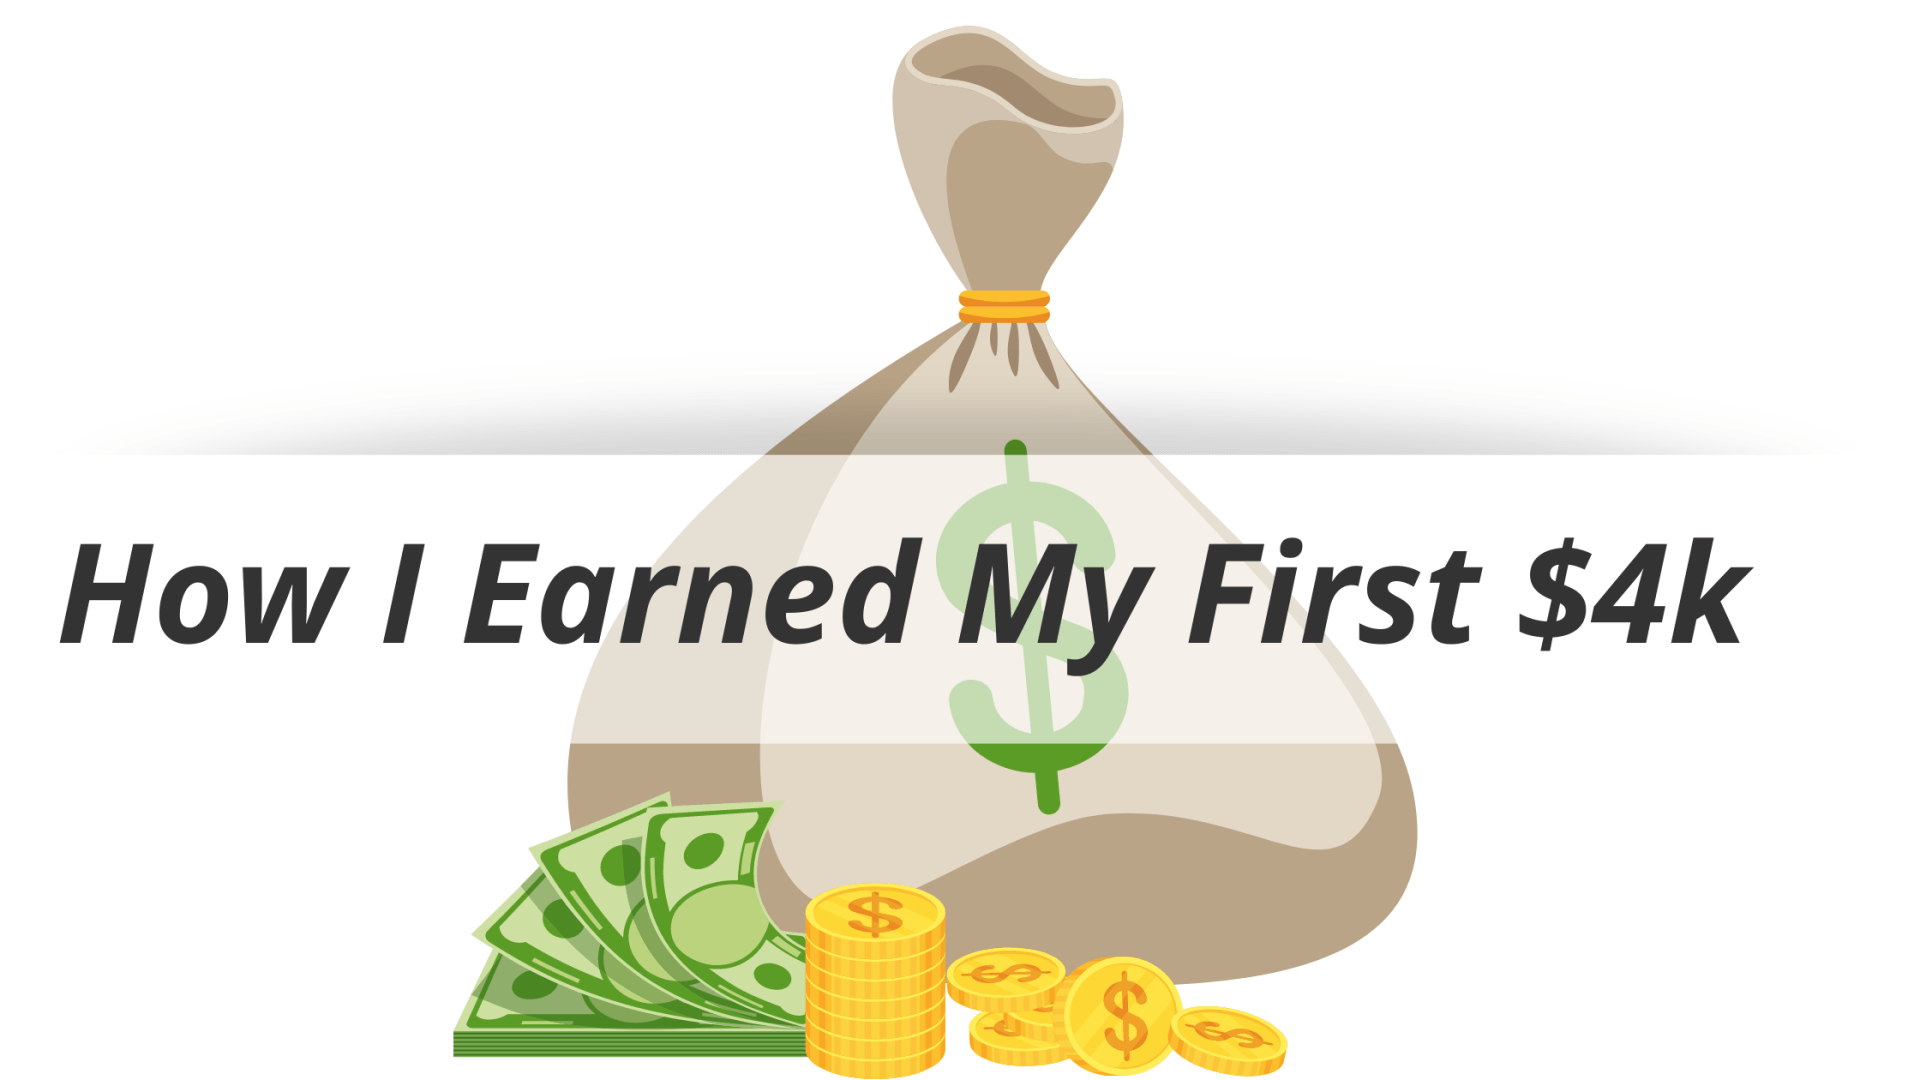 How I earned My first $4k on Upwork as a freelancer